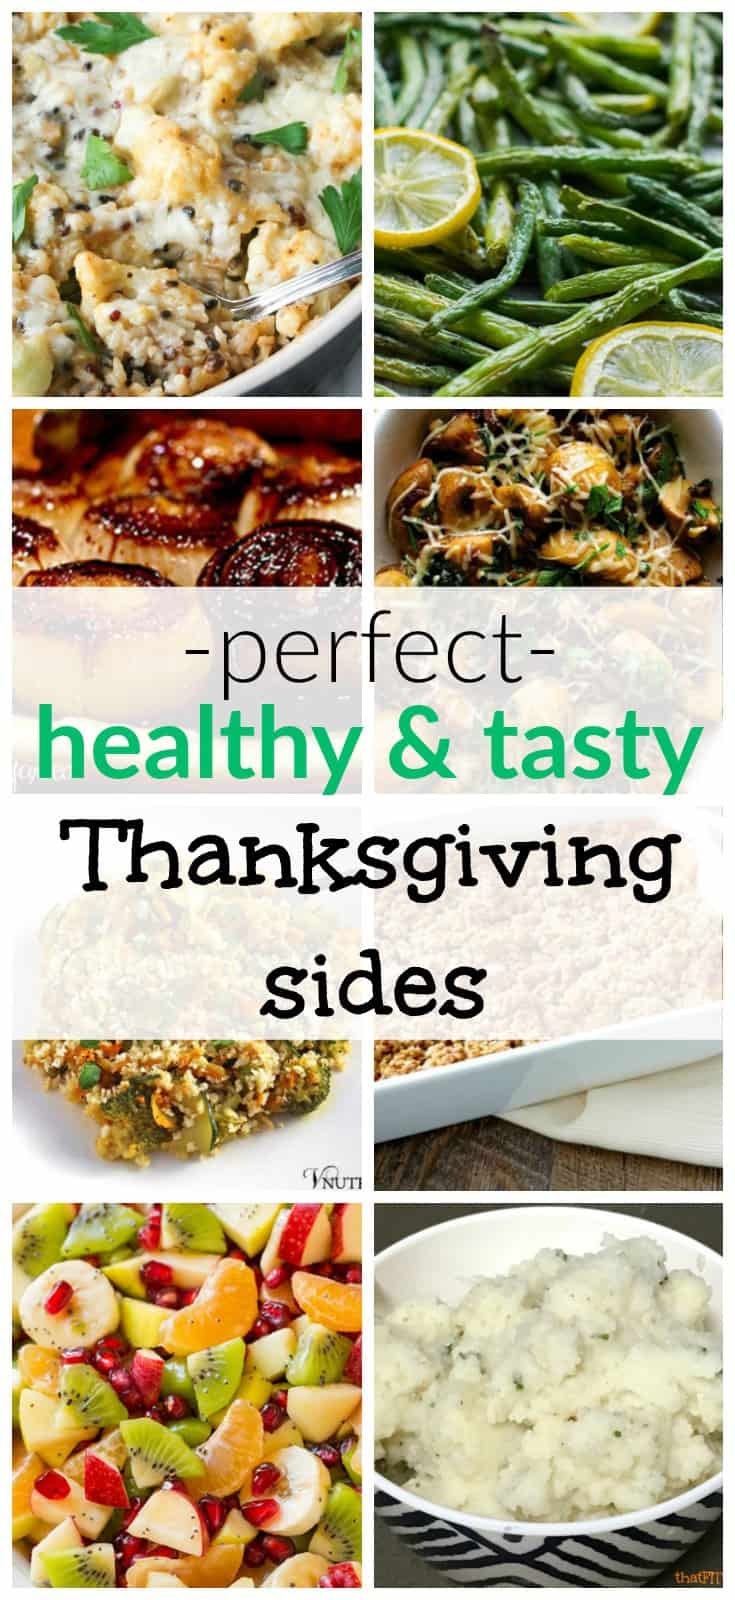 delicious healthy thanksgiving sides that wont ruin your diet. these are so easy too!